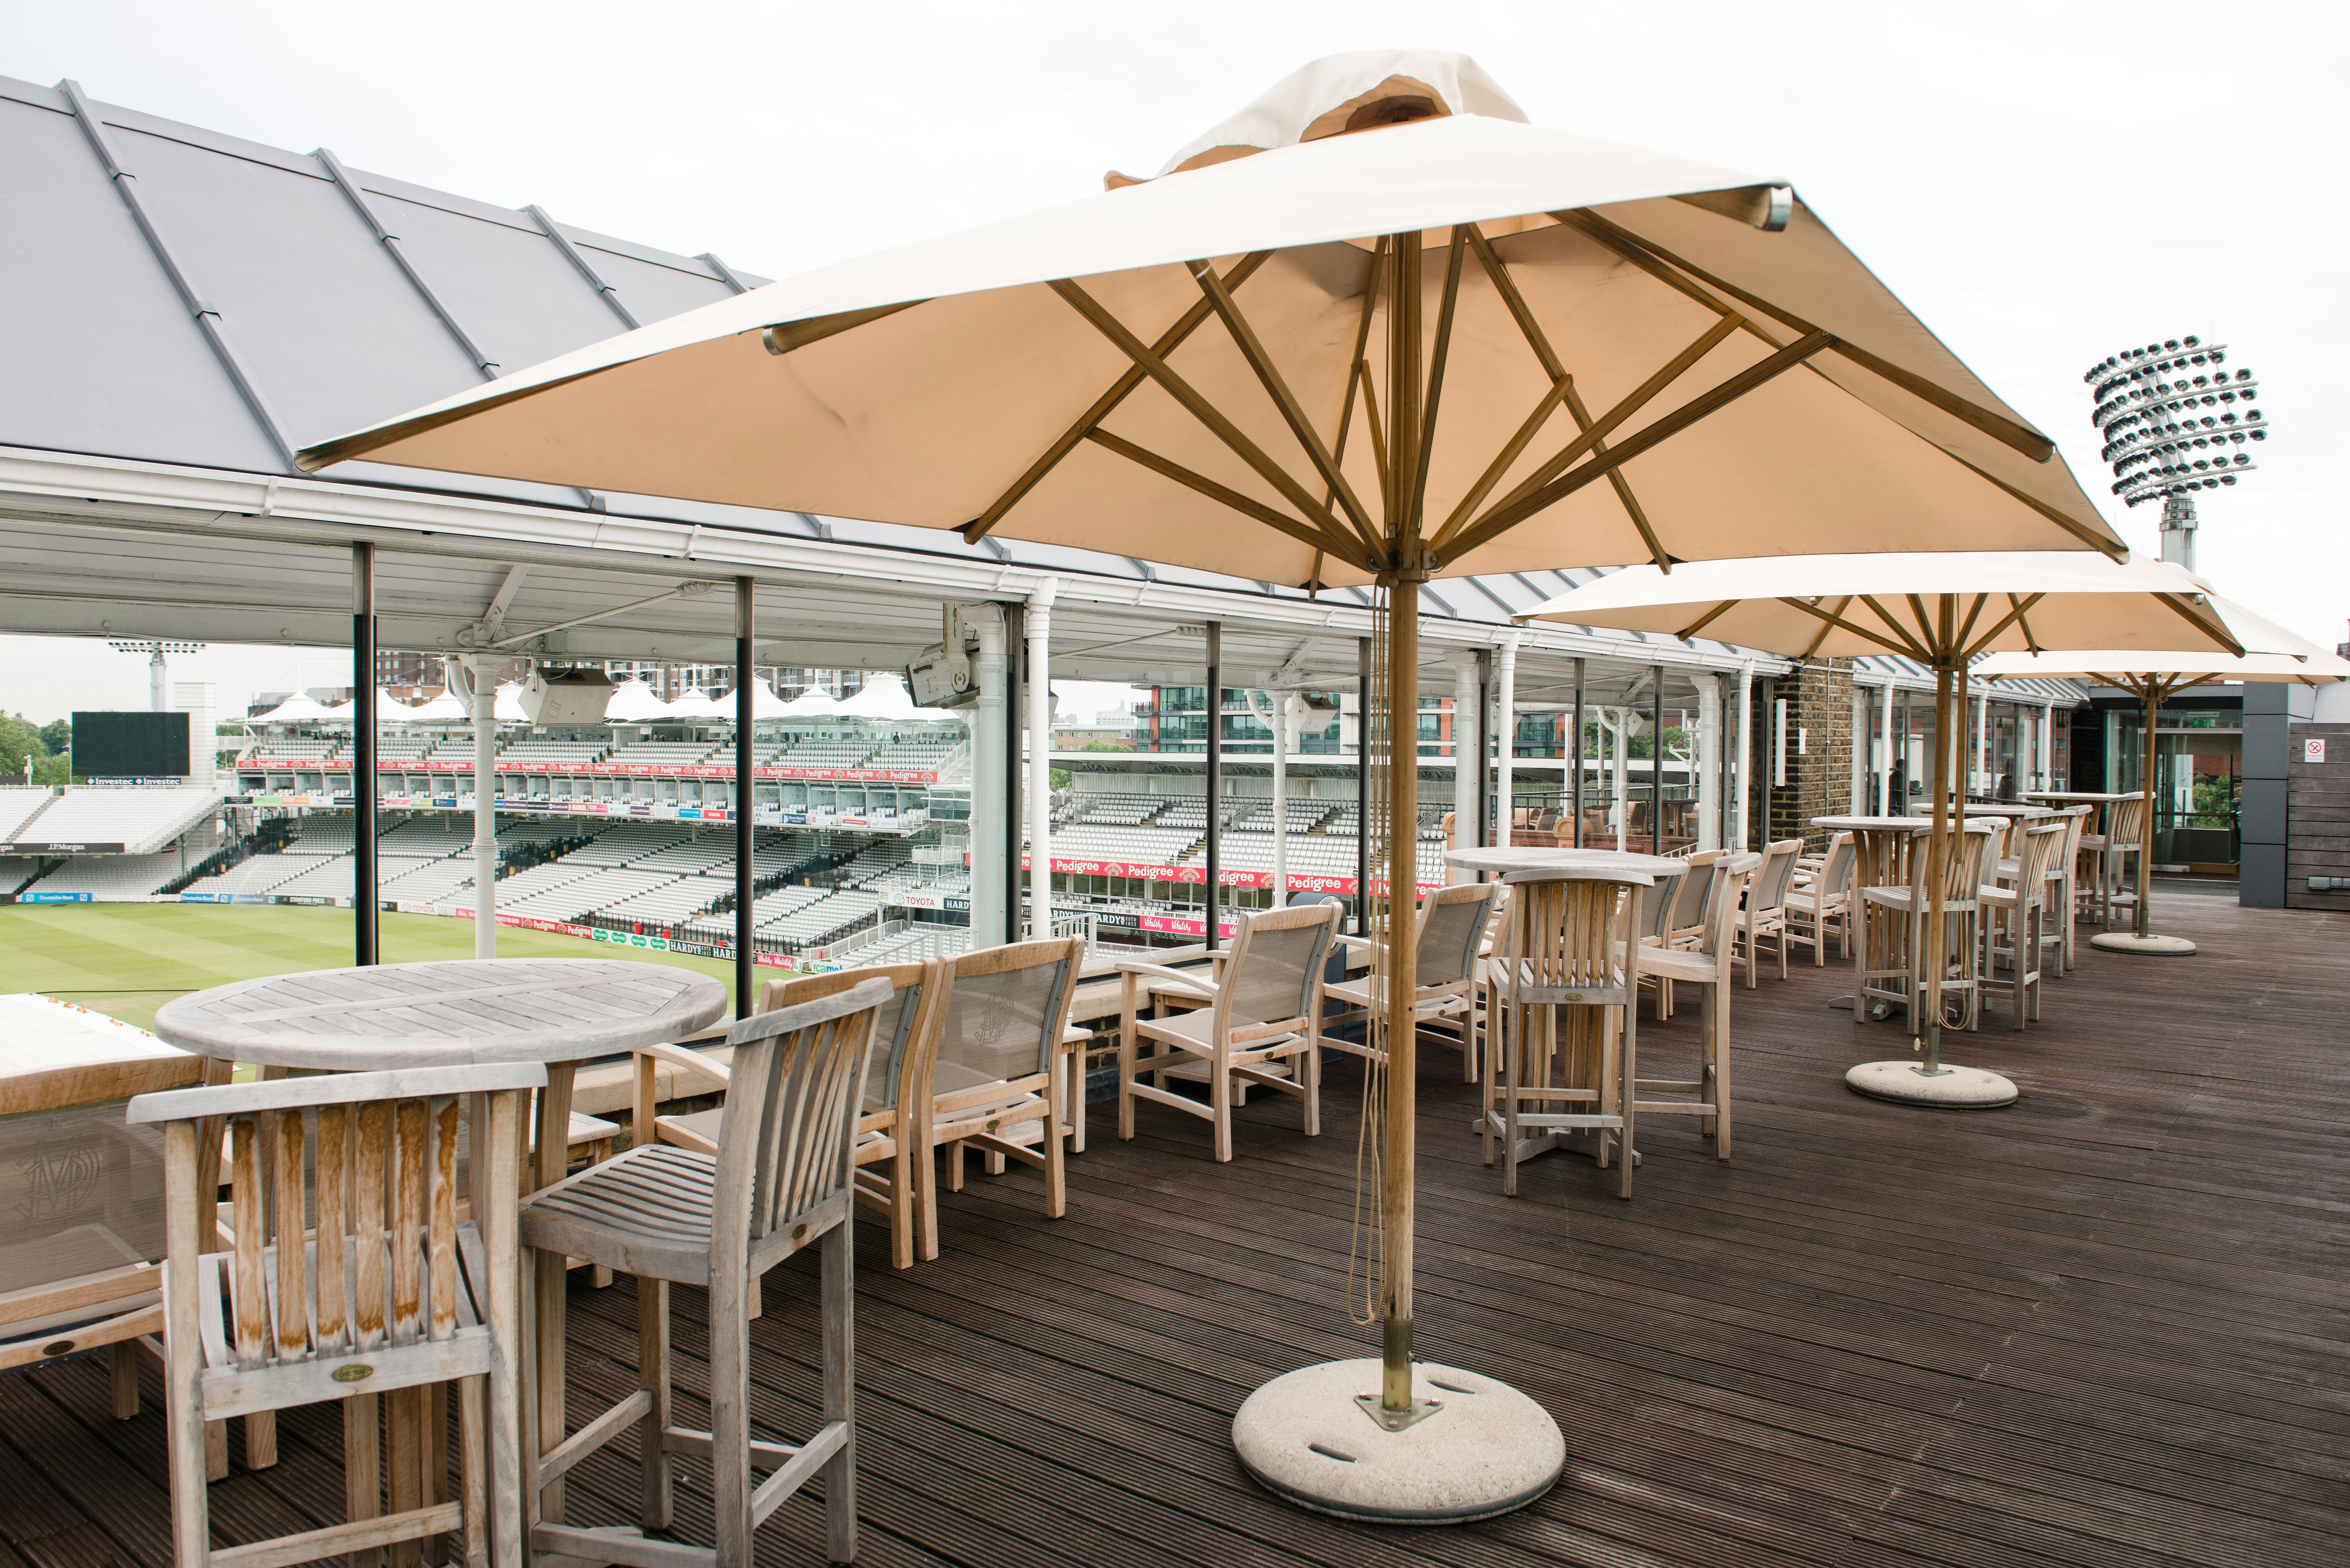 Lord's Cricket Ground - Pavilion Roof Terrace image 2